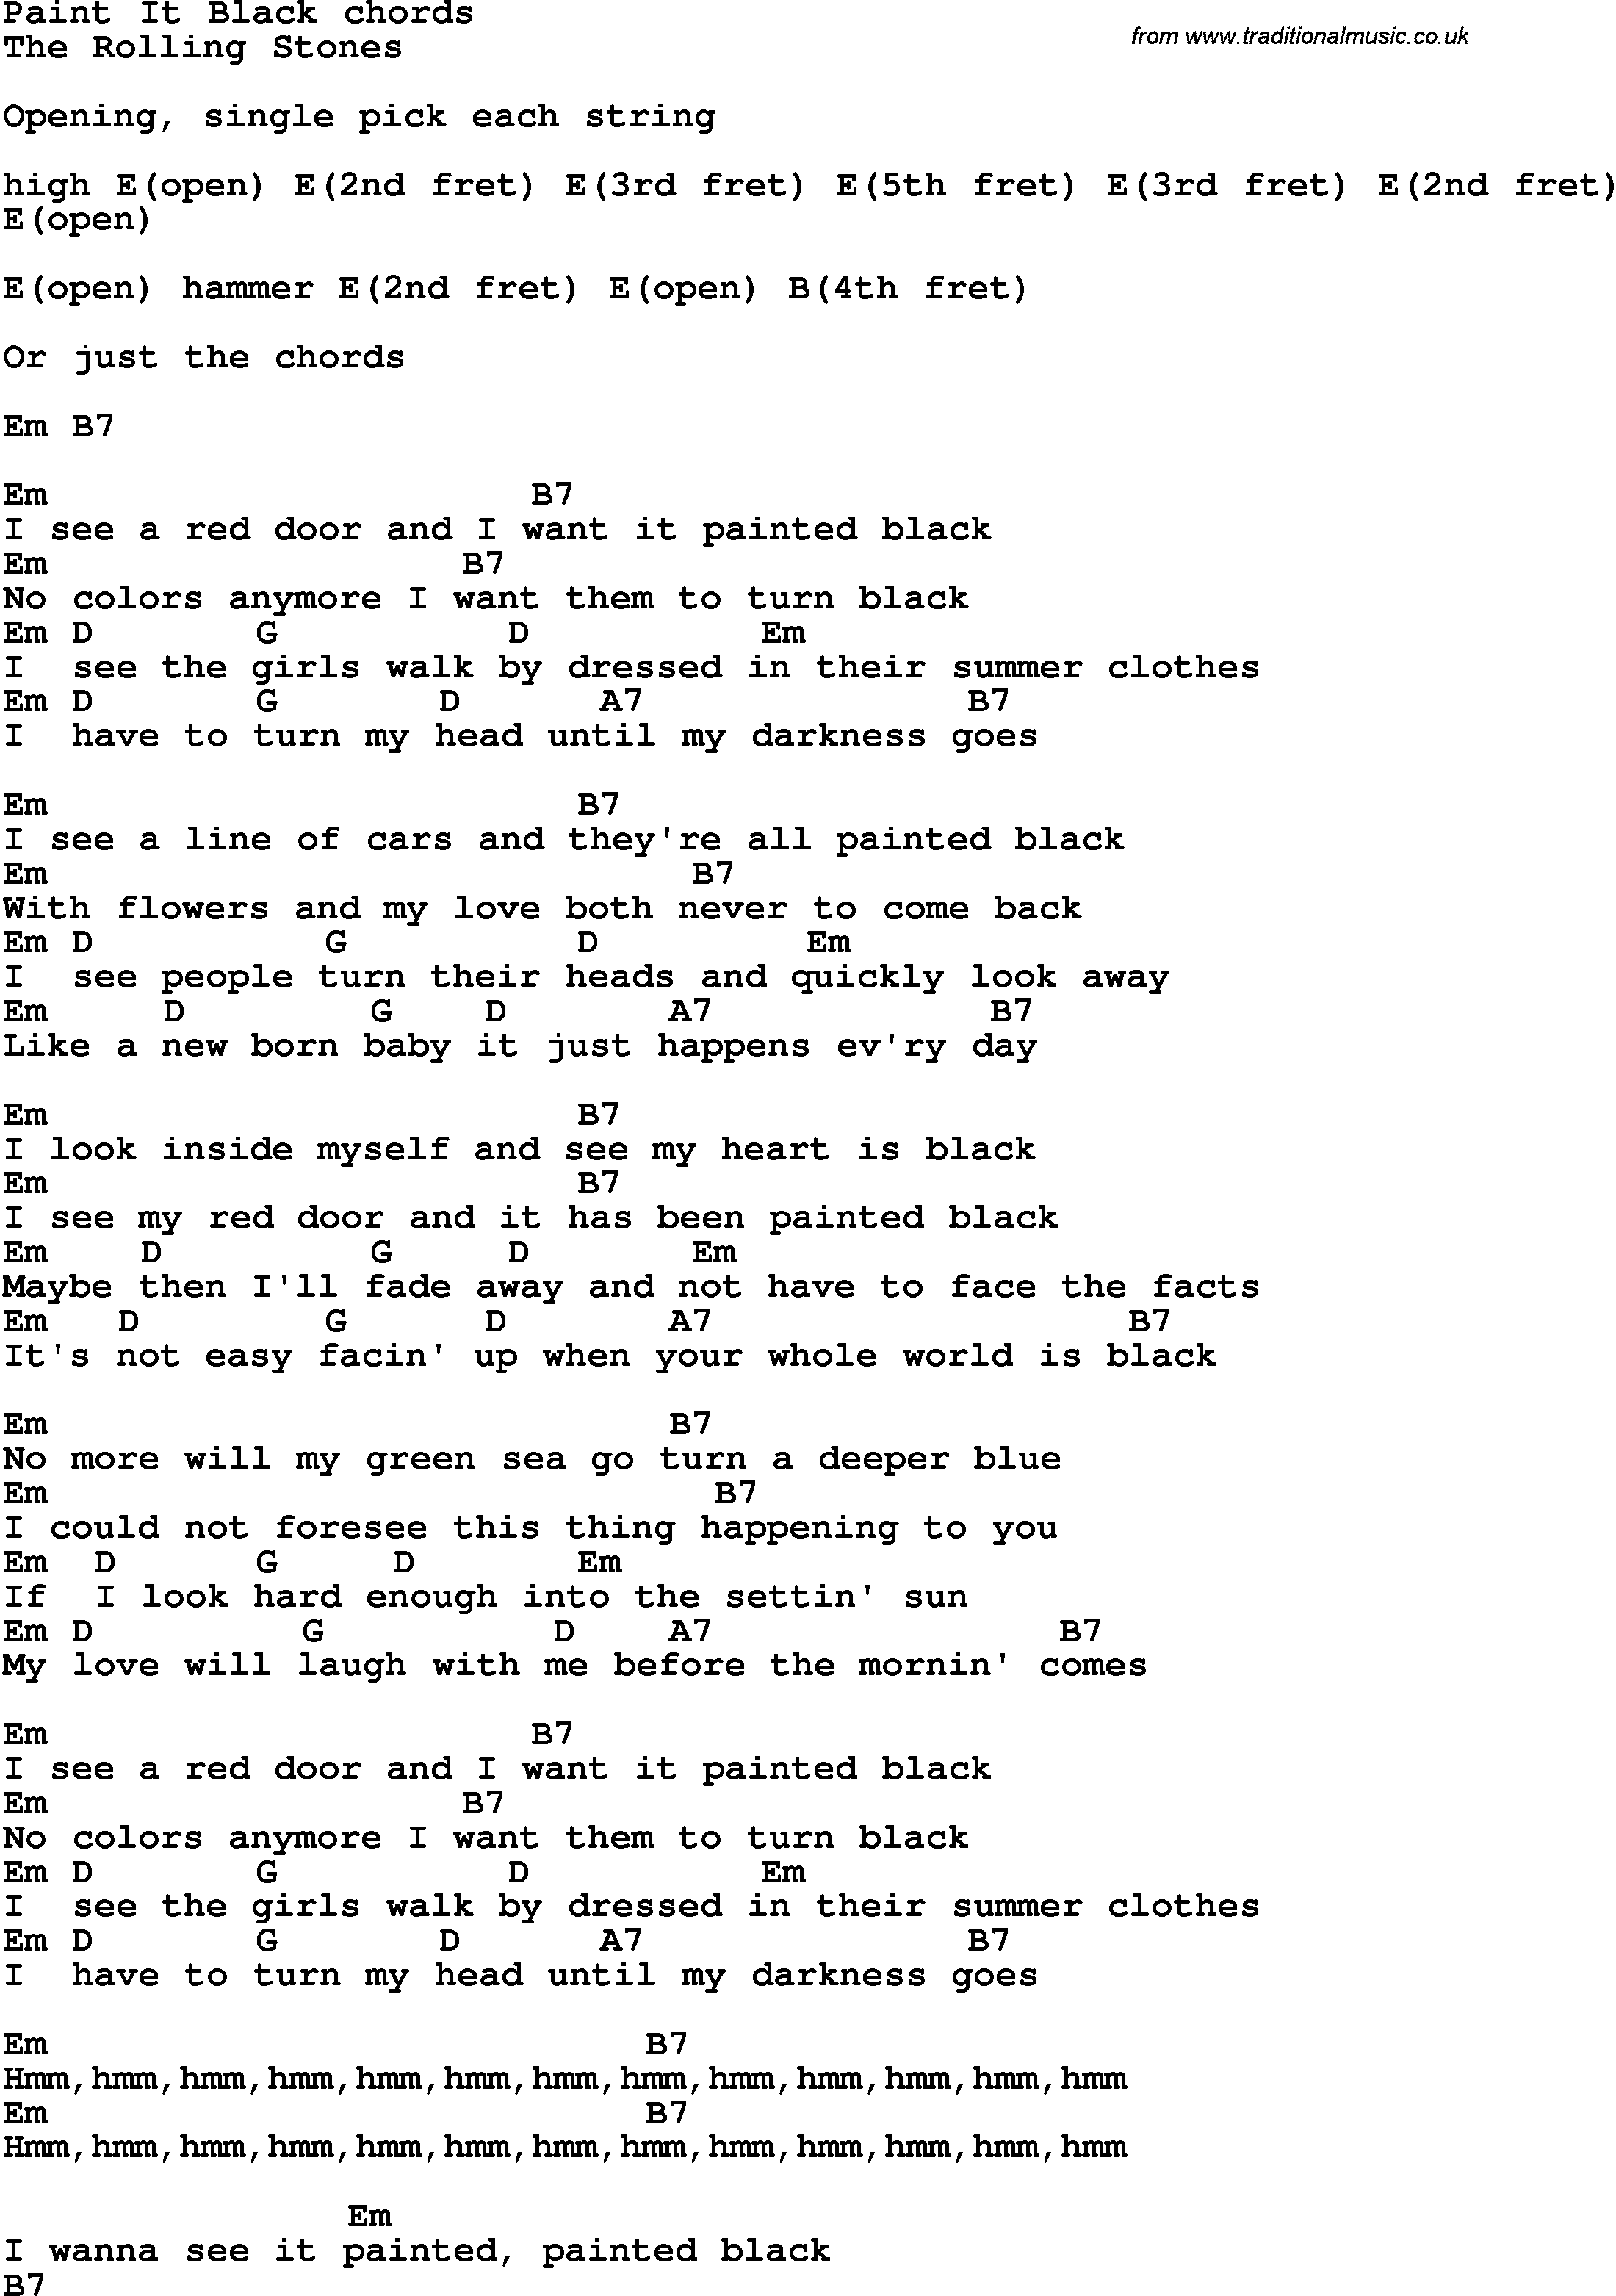 Song Lyrics with guitar chords for Paint It Black